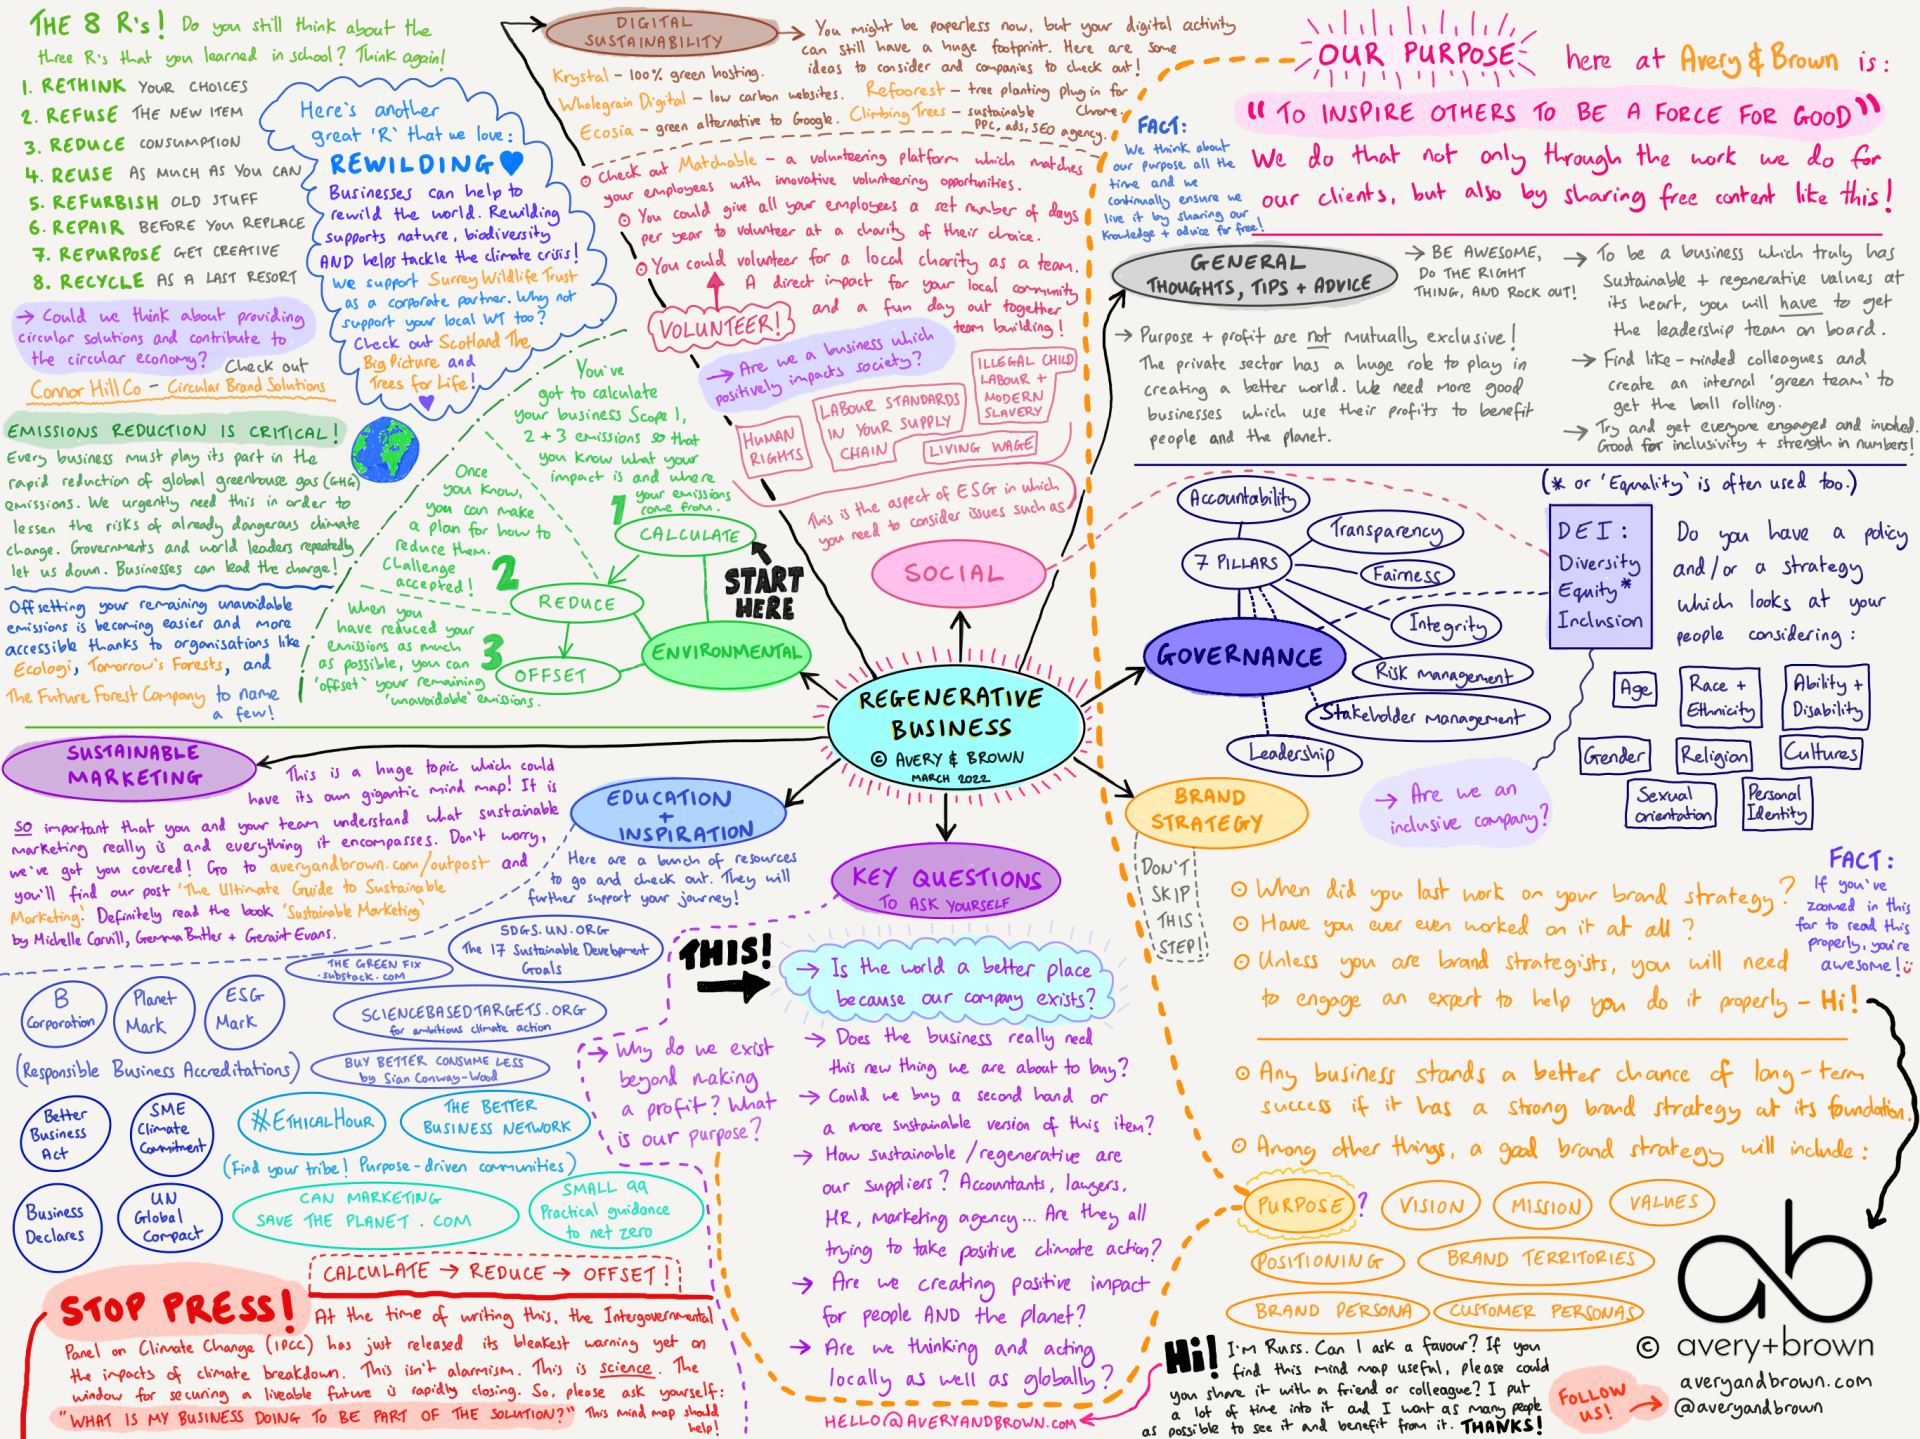 Regenerative Business Mind Map - Avery and Brown - March 2022